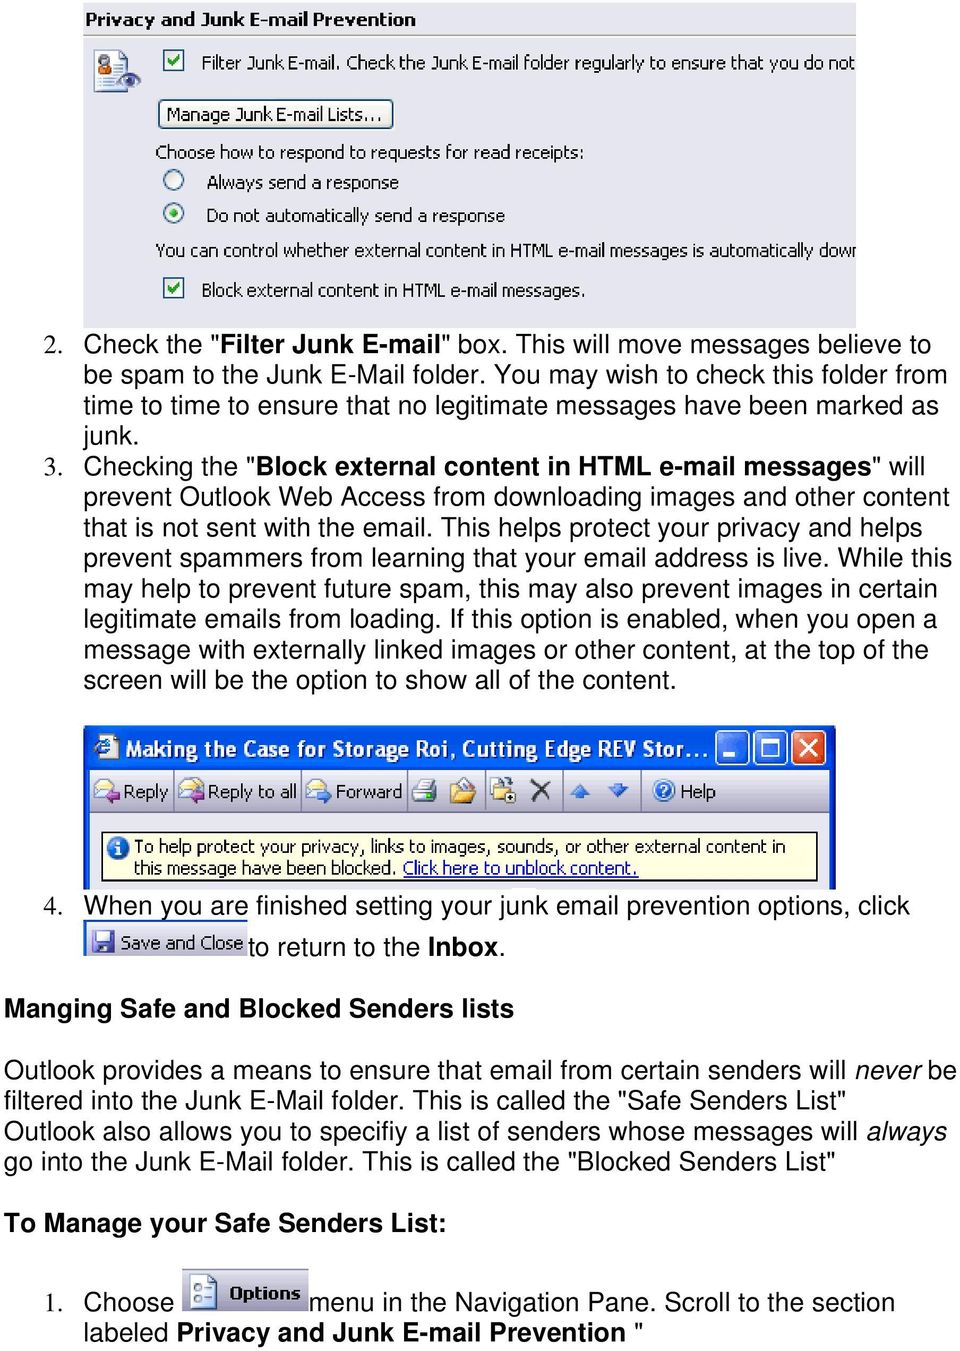 Checking the "Block external content in HTML e-mail messages" will prevent Outlook Web Access from downloading images and other content that is not sent with the email.